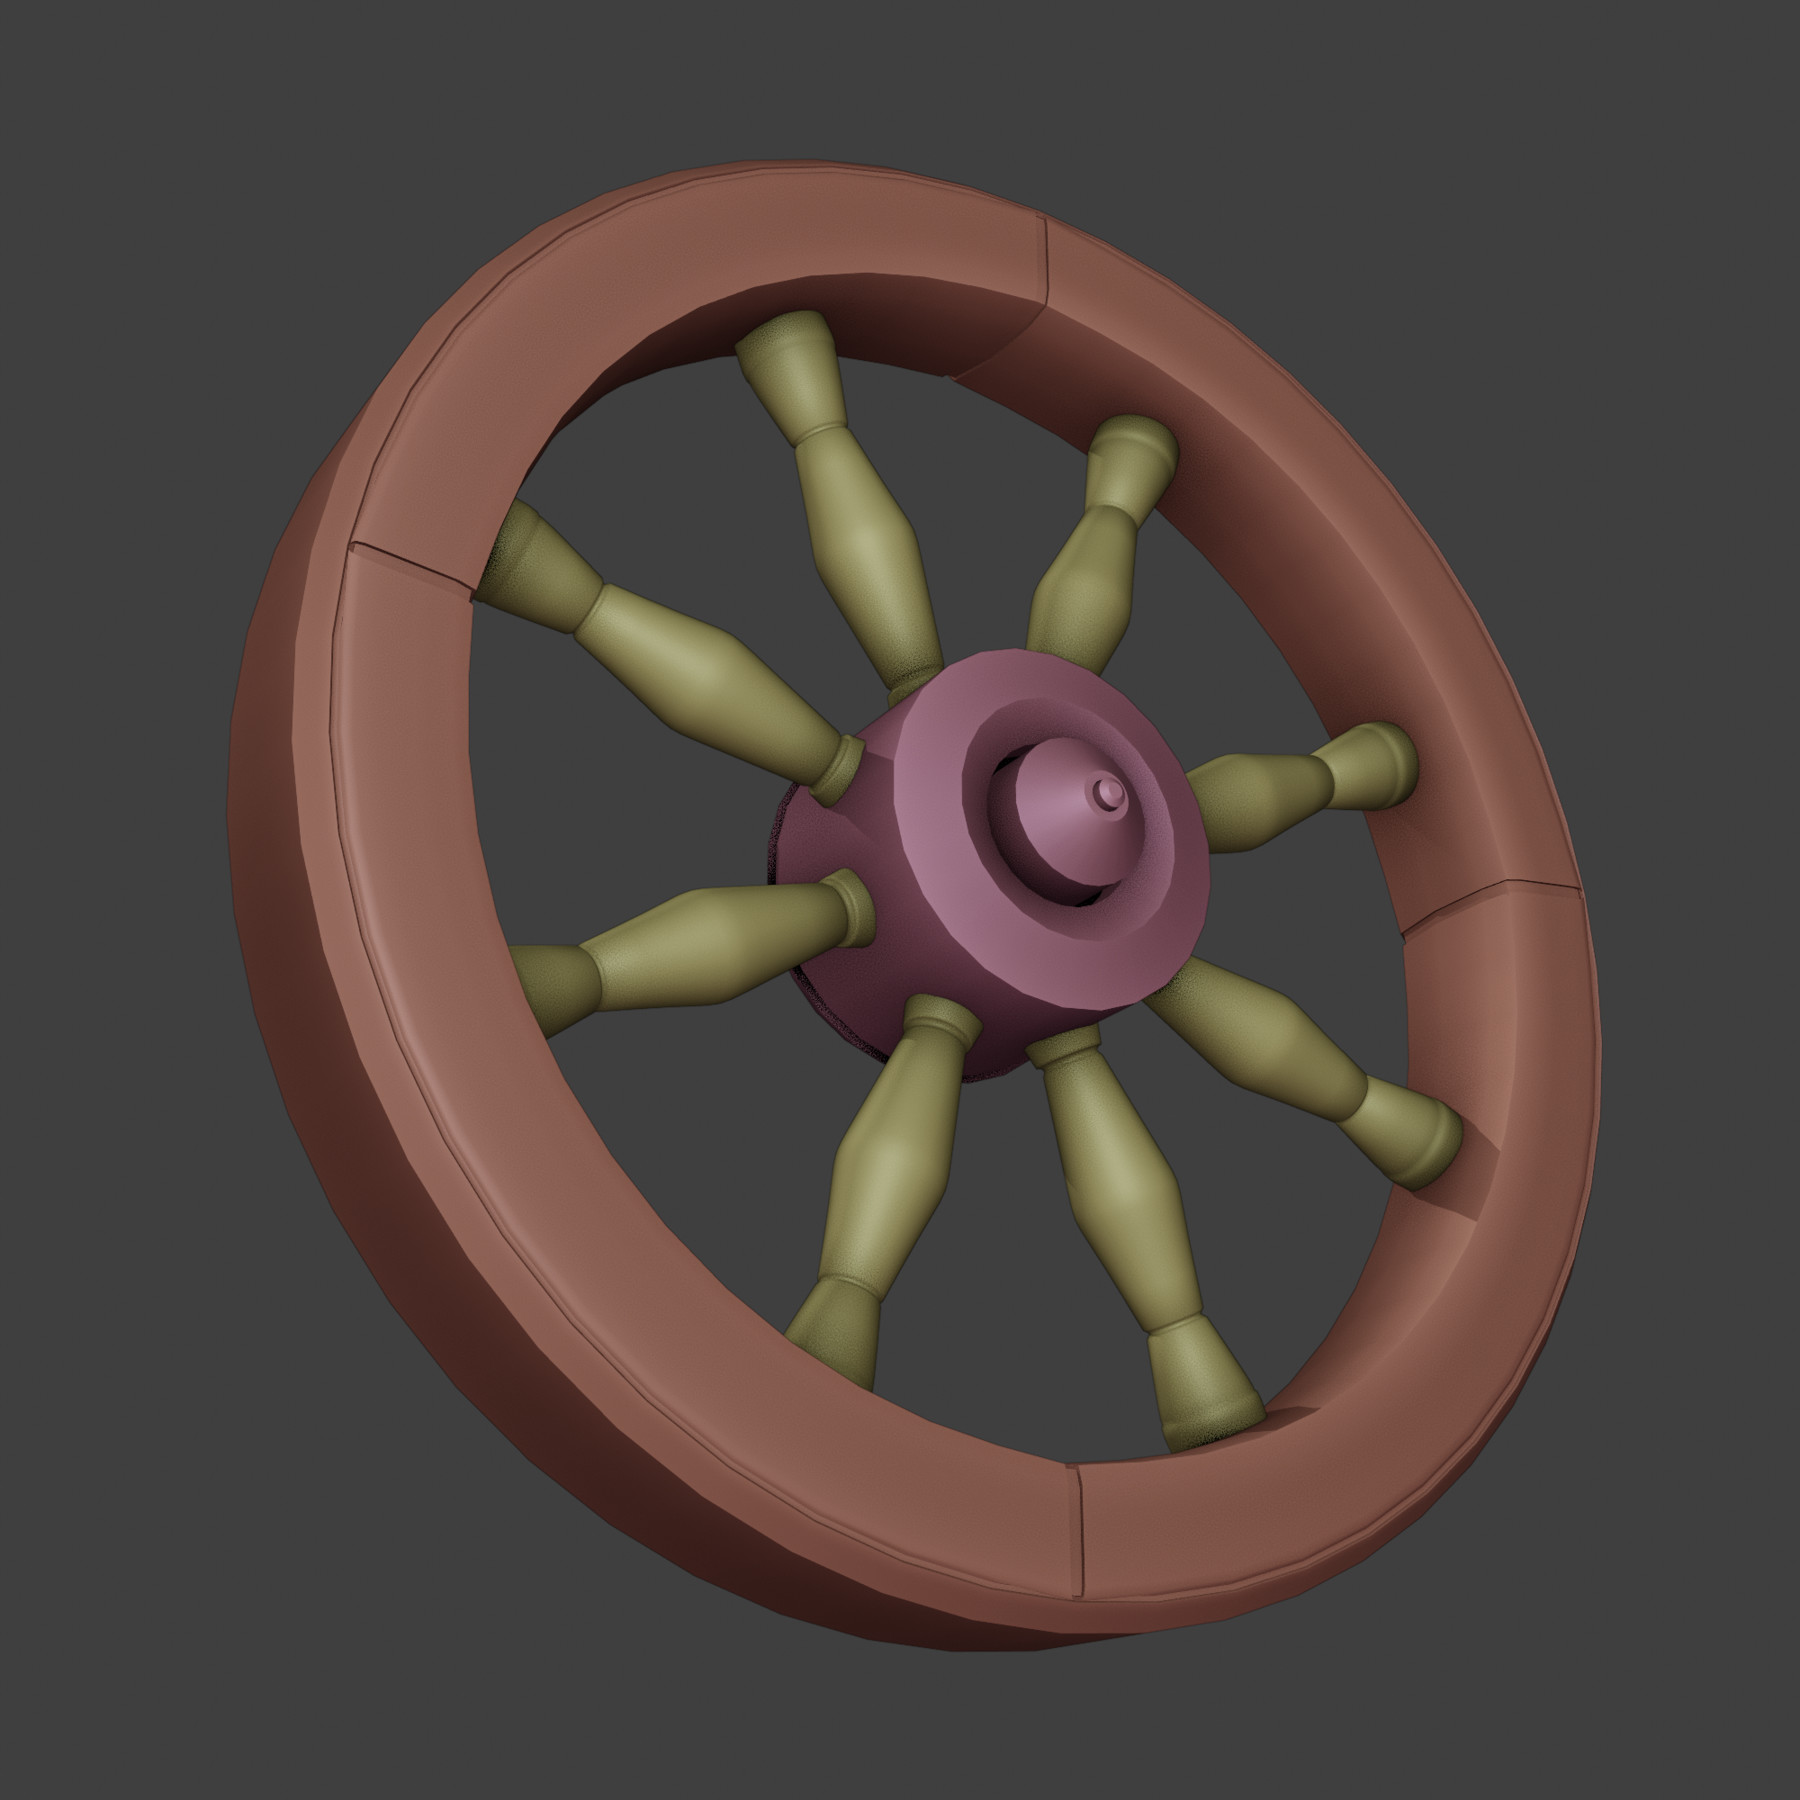 Wooden Wagon Wheel Made with Blender 2.8 High-quality model ready to use in...